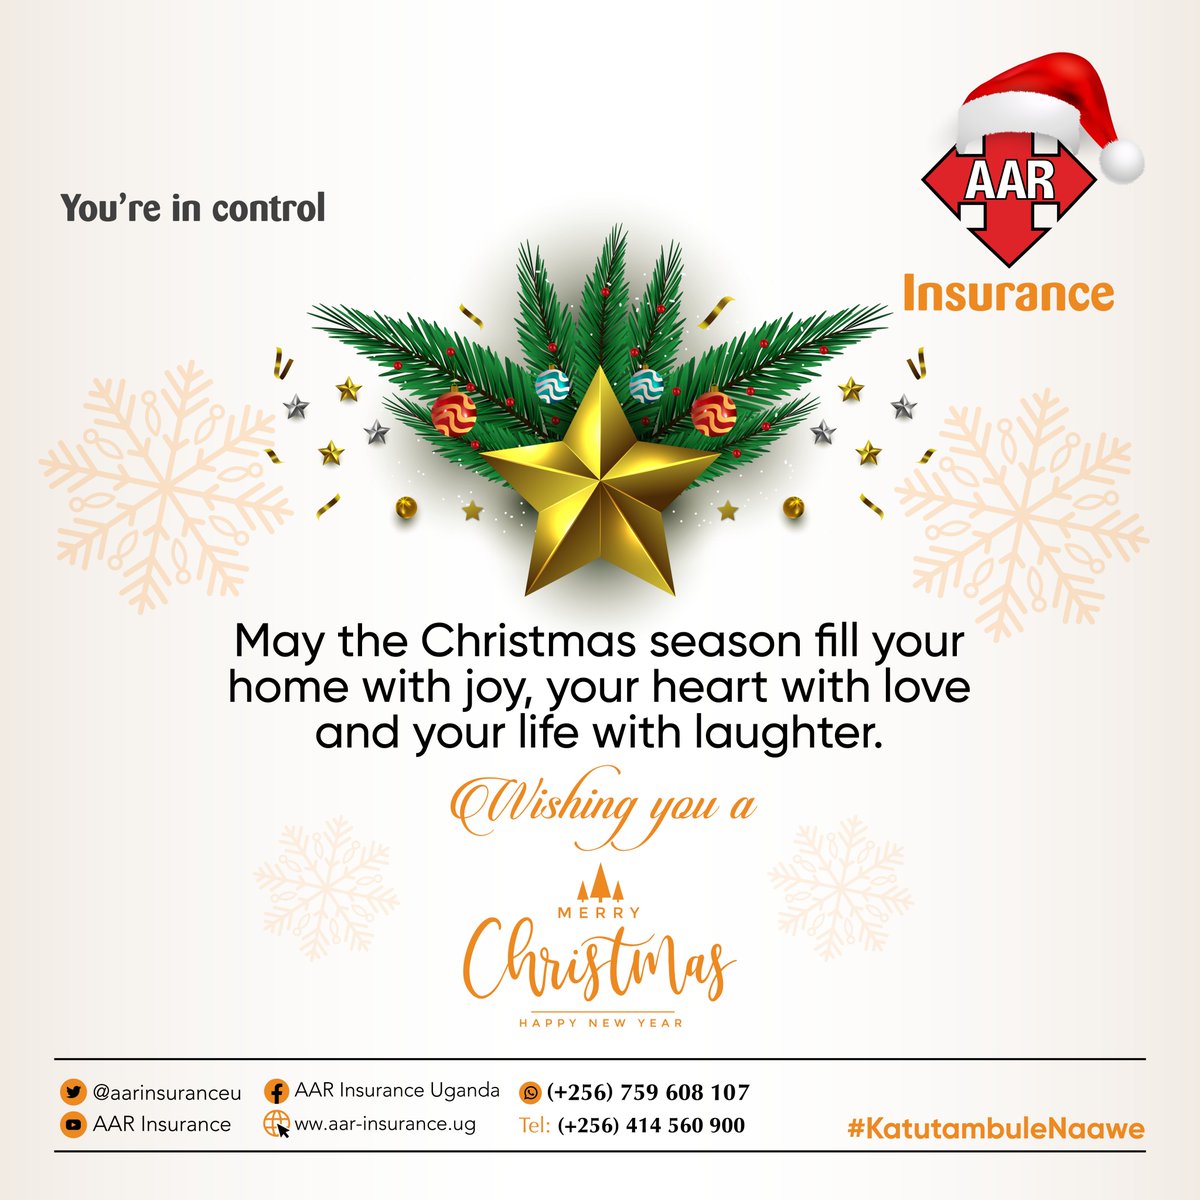 Let’s spread the love and cheer this Christmas. Wishing you a Merry Christmas.
#AARInsurance #KatutambuleNawe